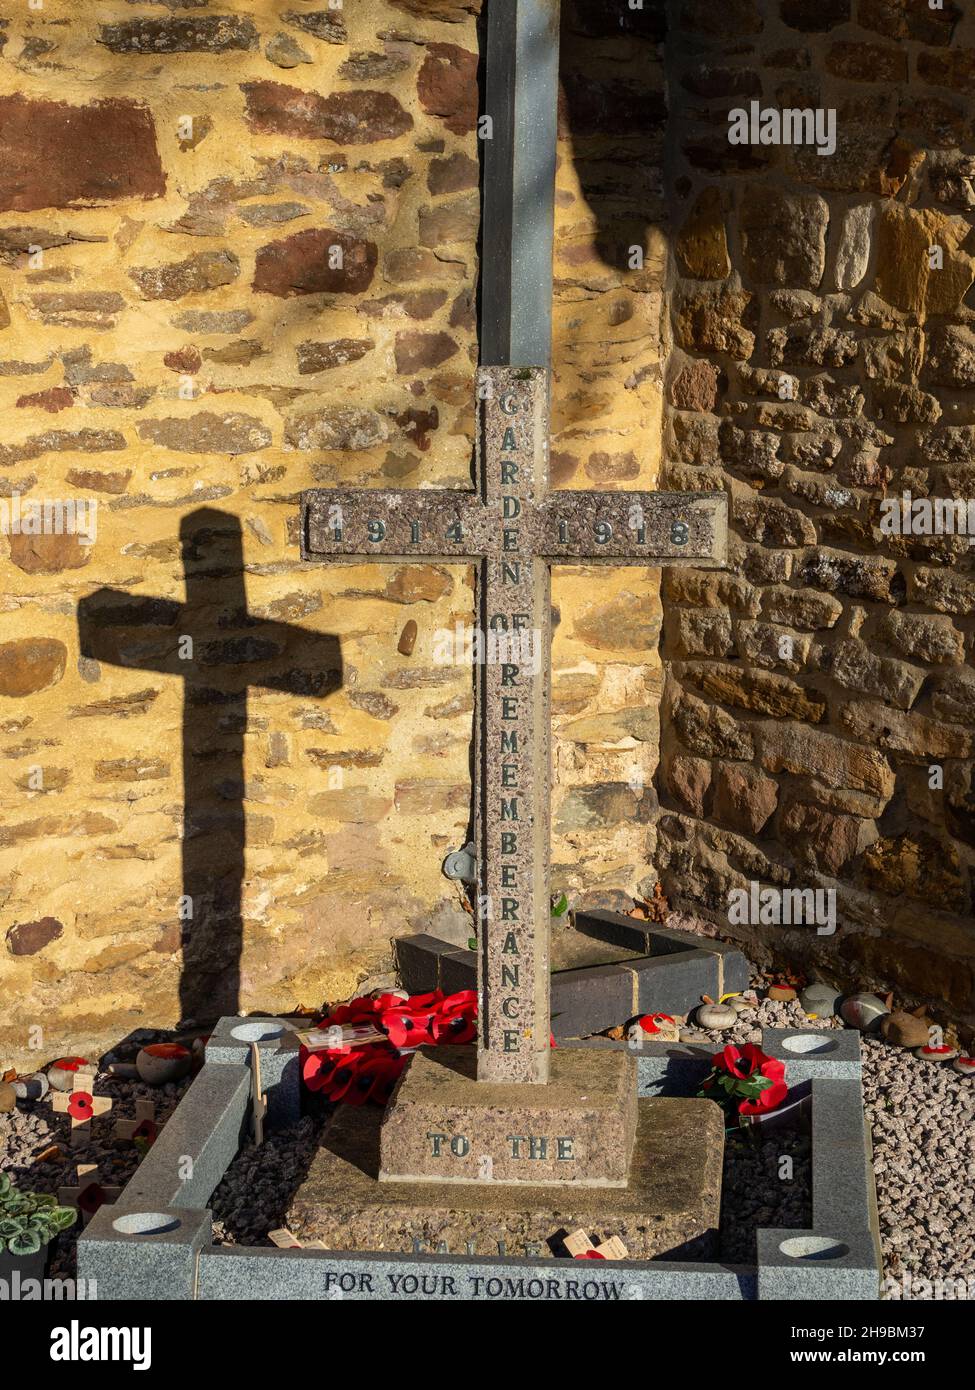 Wooden cross of sacrifice with shadow, memorial to the fallen of WW1, St Faith church, Kilsby, Northamptonshire, UK Stock Photo